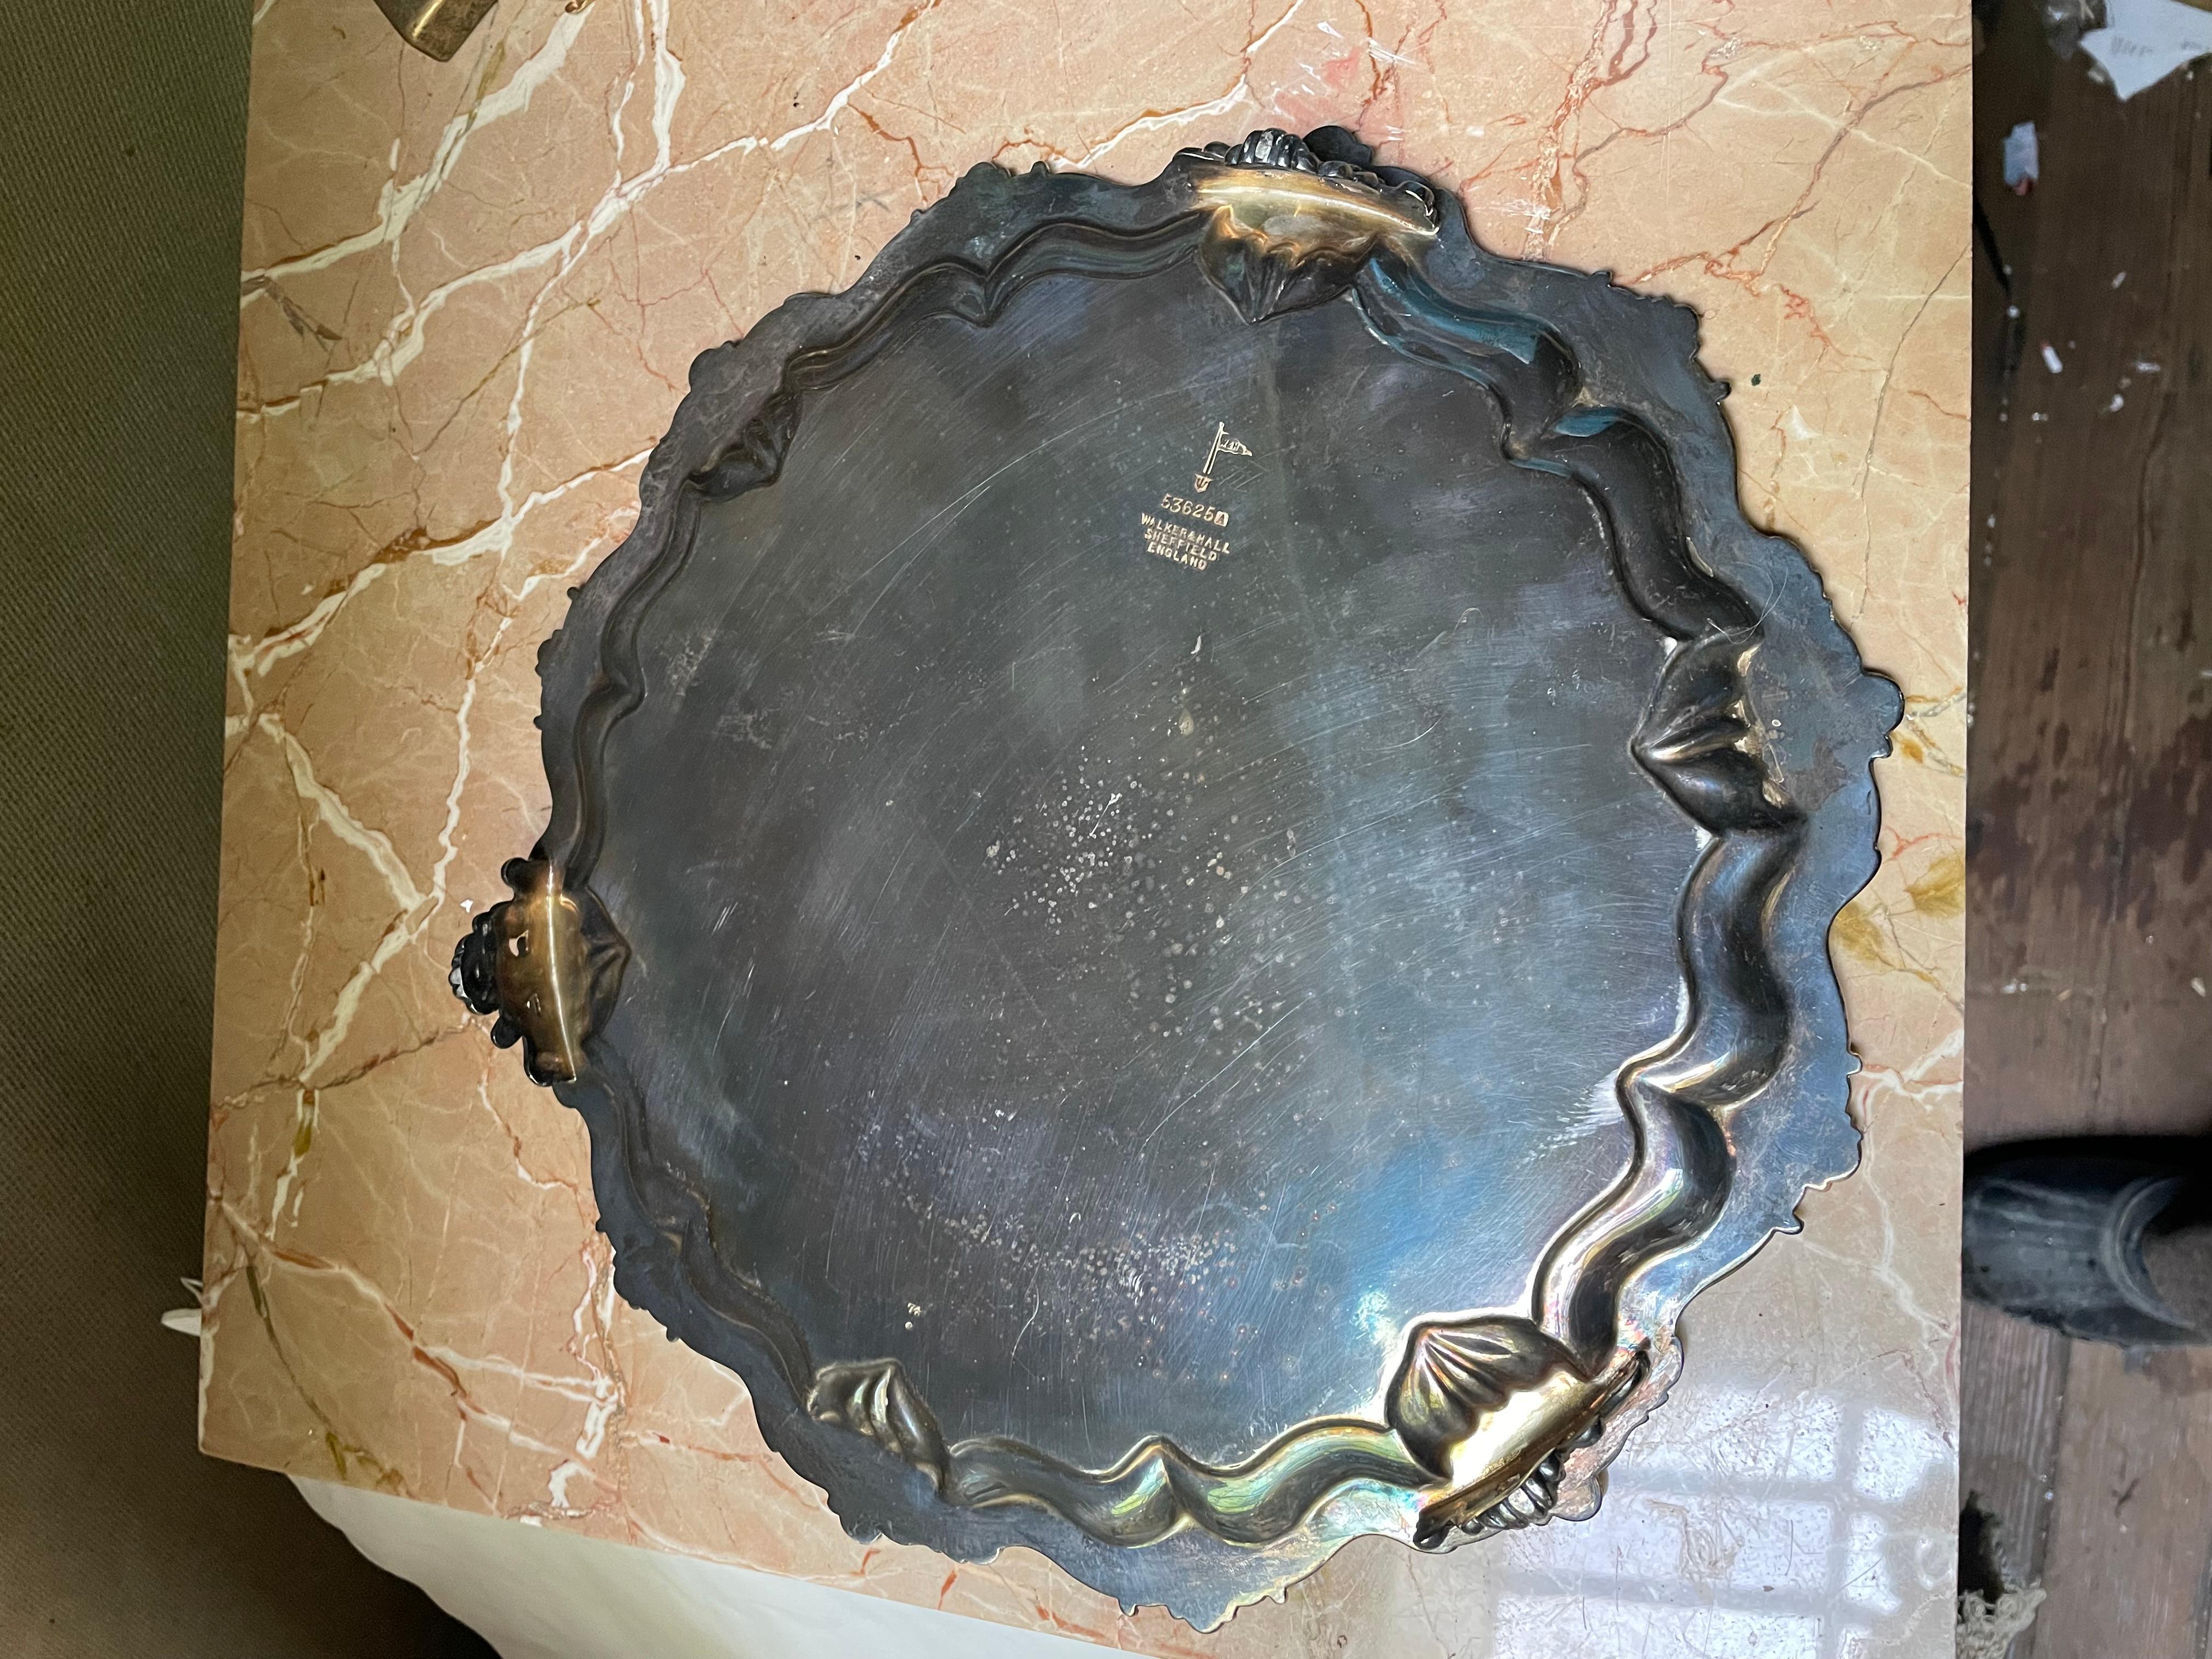 Walker & Hall 1906 Sheffield England Silverplate Salver Footed Tray Plateau  In Fair Condition For Sale In Clifton Forge, VA